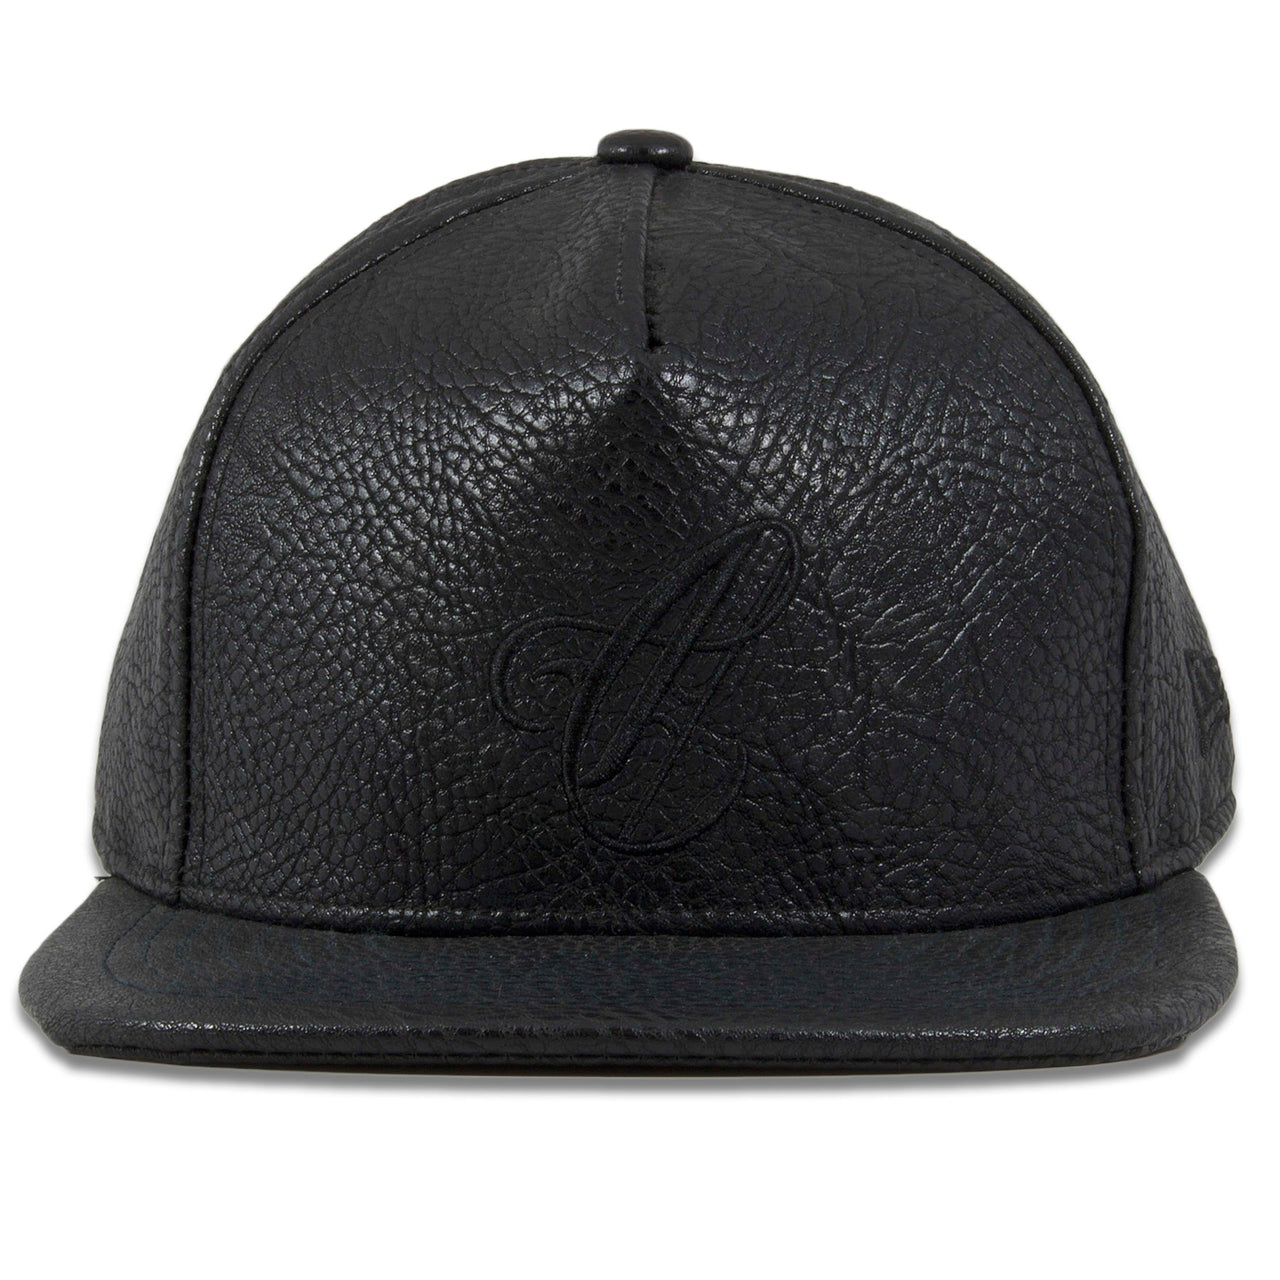 Crooks and Castles Leather Woven C Black Strapback Hat